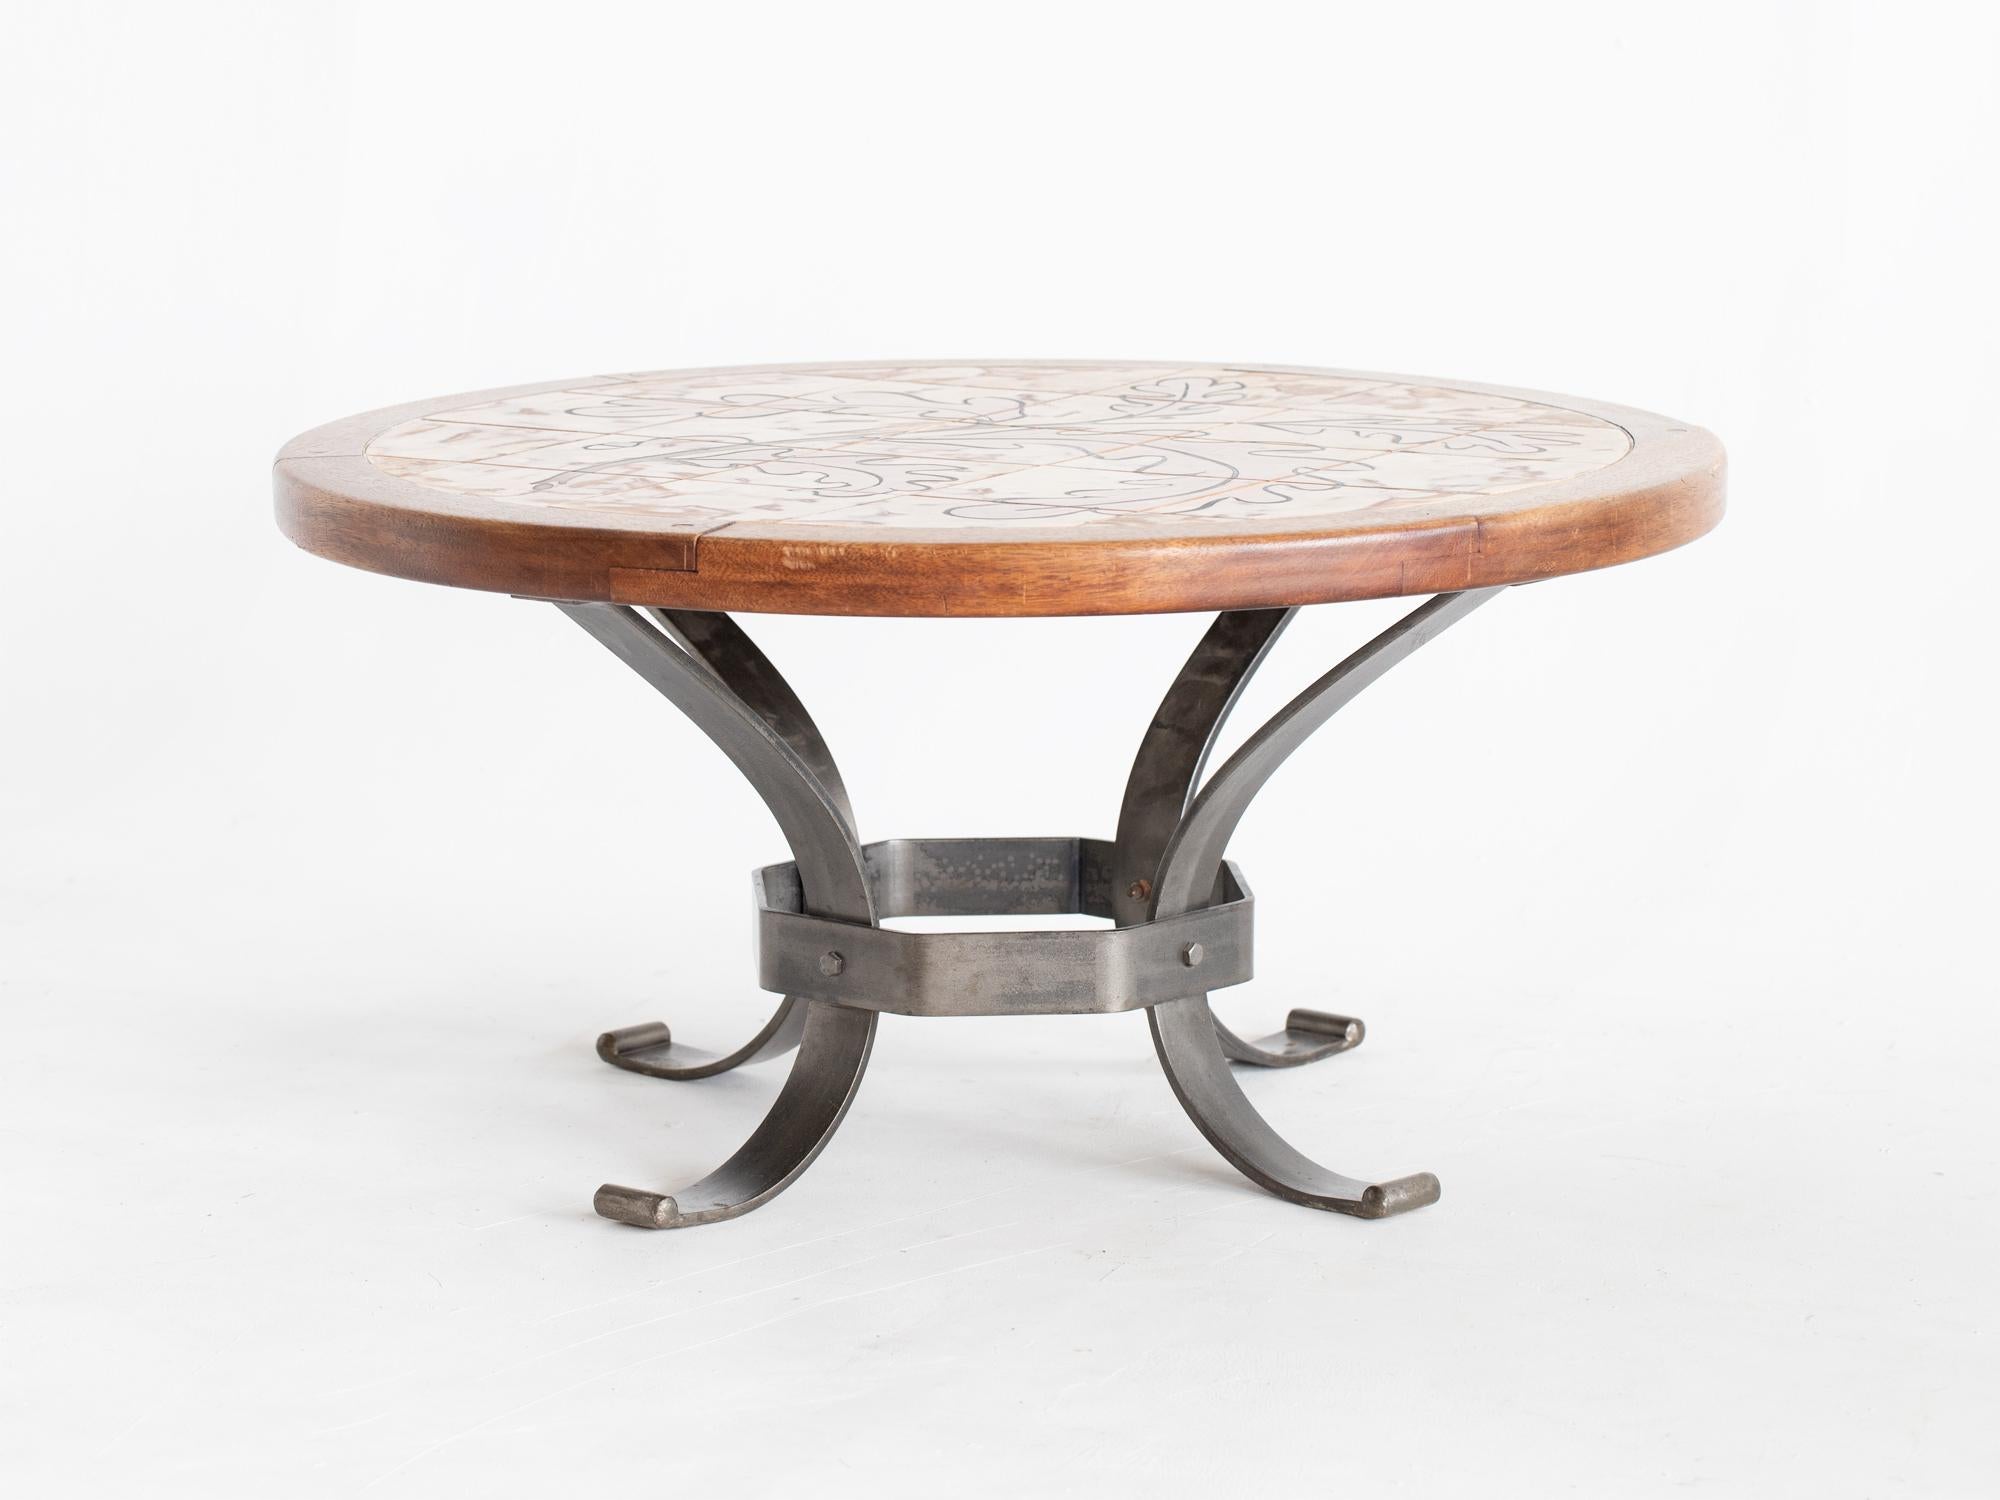 A mid century circular coffee table signed Dutron. French, c. 1970.

The ceramic tile top, depicting an autumnal branch of an oak tree, with walnut border raised on a steel base.

In good sturdy order with undamaged tiles.

42.5 x 87 x 87 cm

16.7 x